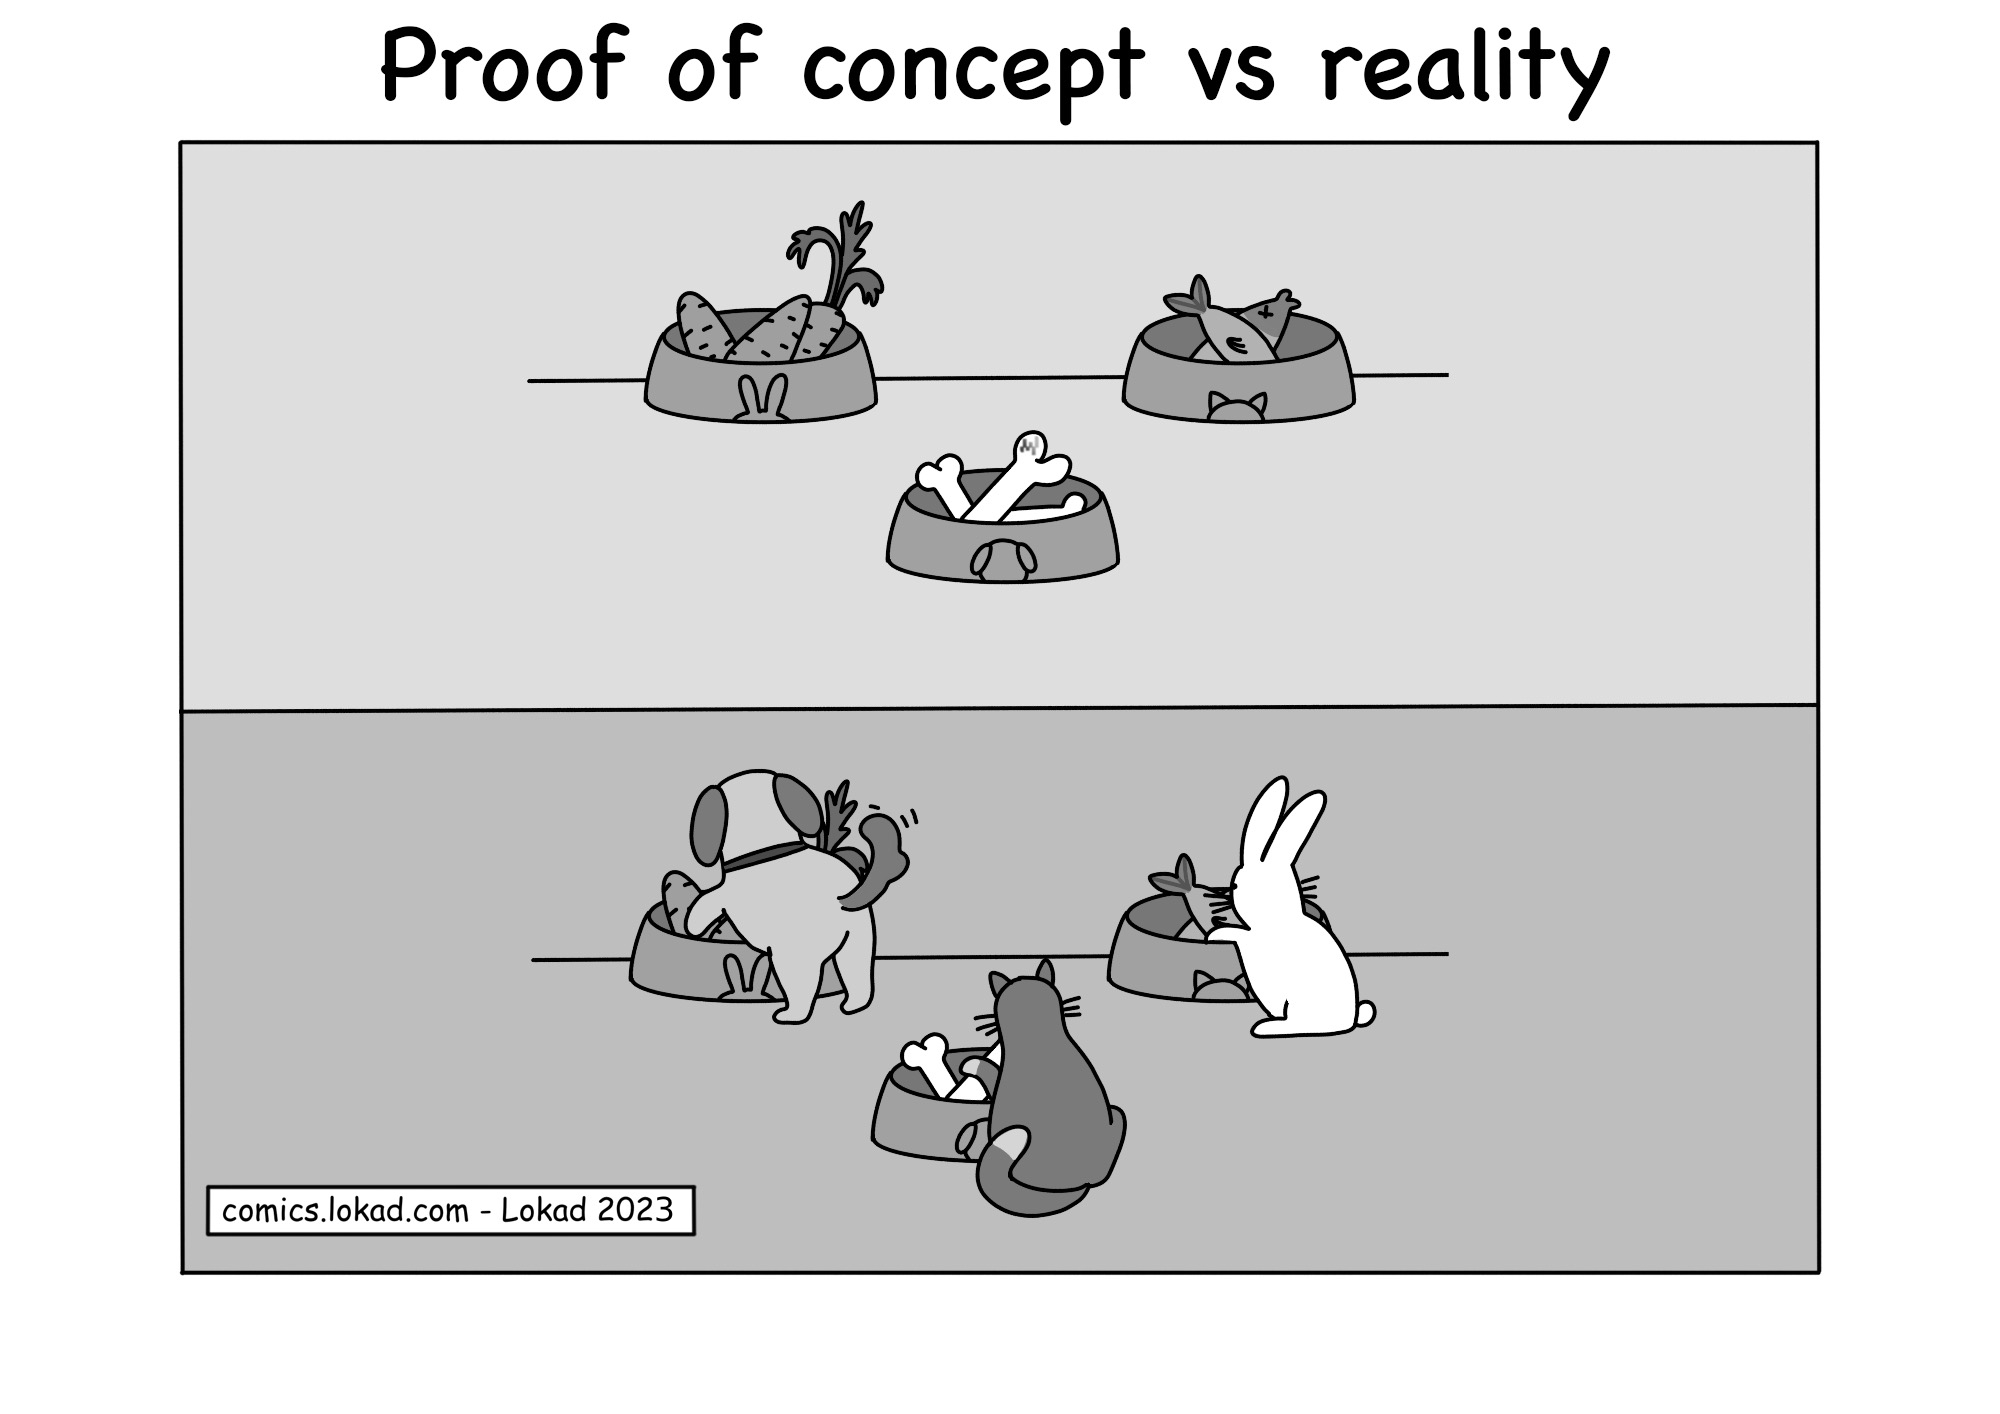 Proof of concept vs reality